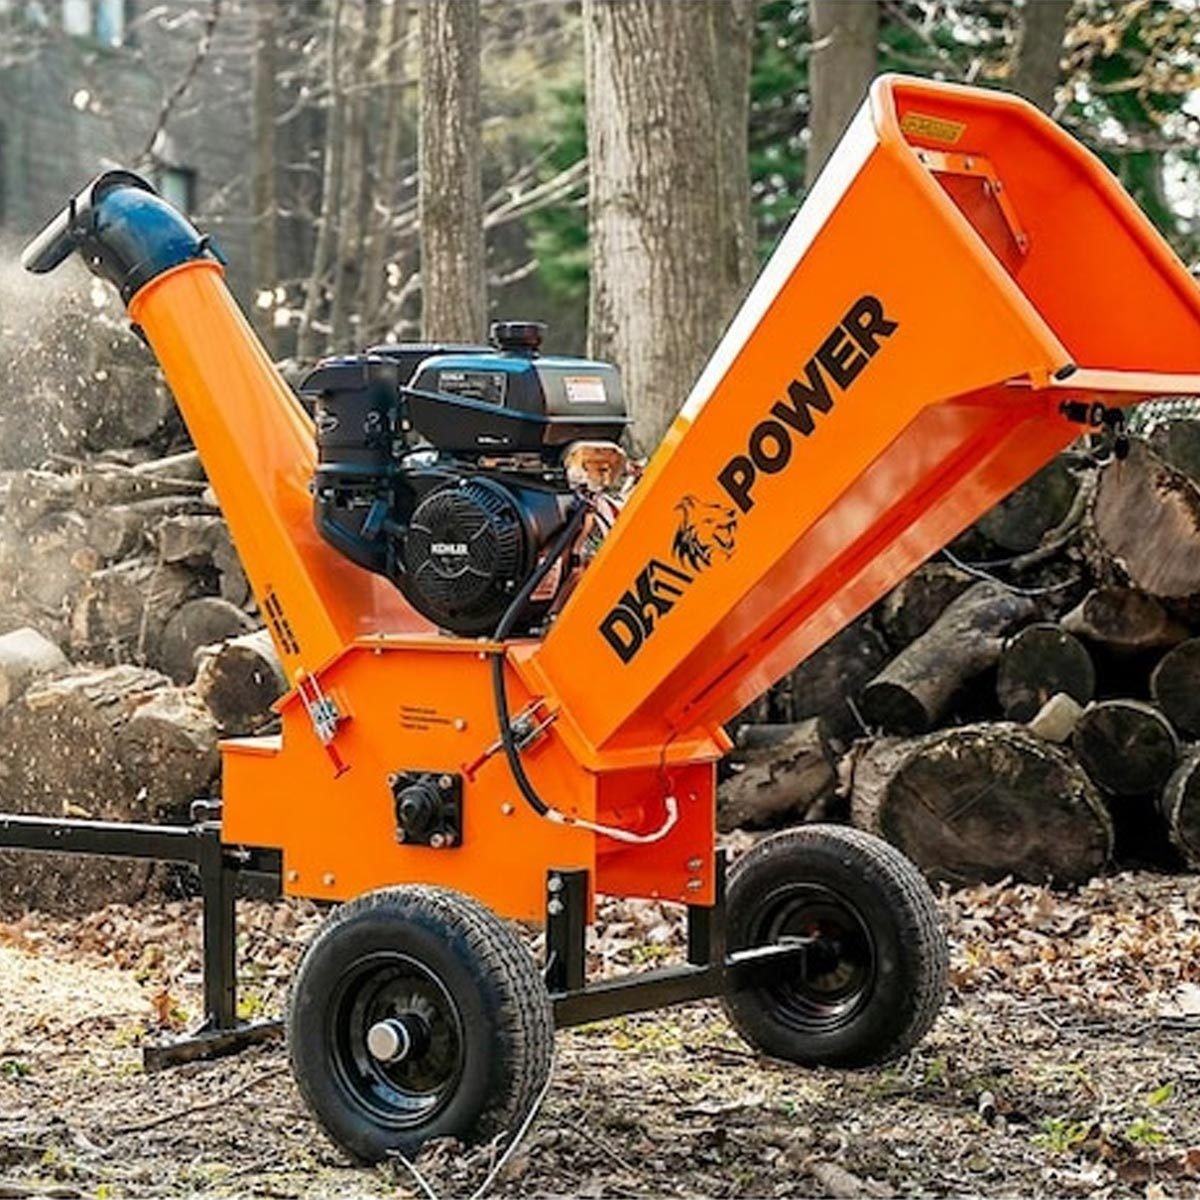 https://www.familyhandyman.com/wp-content/uploads/2022/02/5-Best-Electric-Wood-Chippers-of-2023_FT_via-lowes.com_-1.jpg